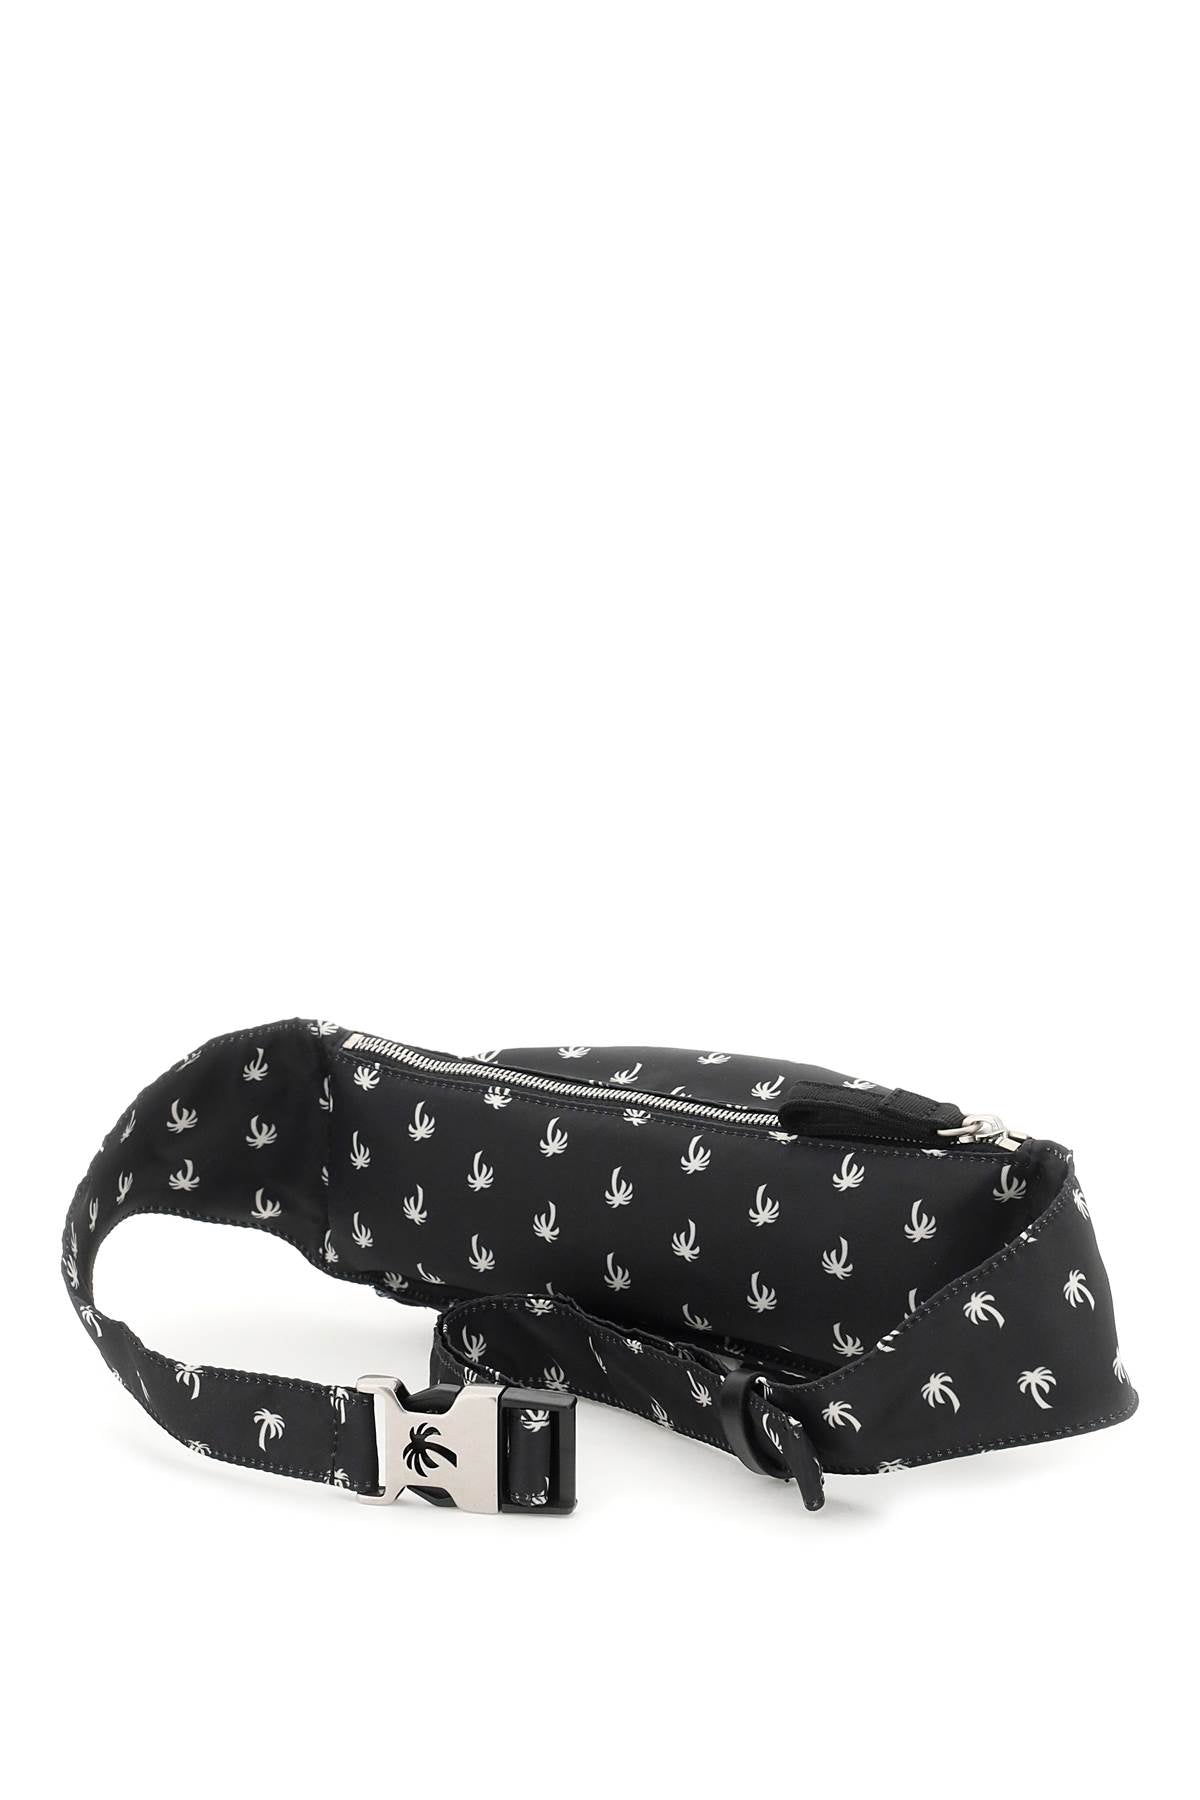 Palm Angels Beltpack With All Over Palms Motif   Nero